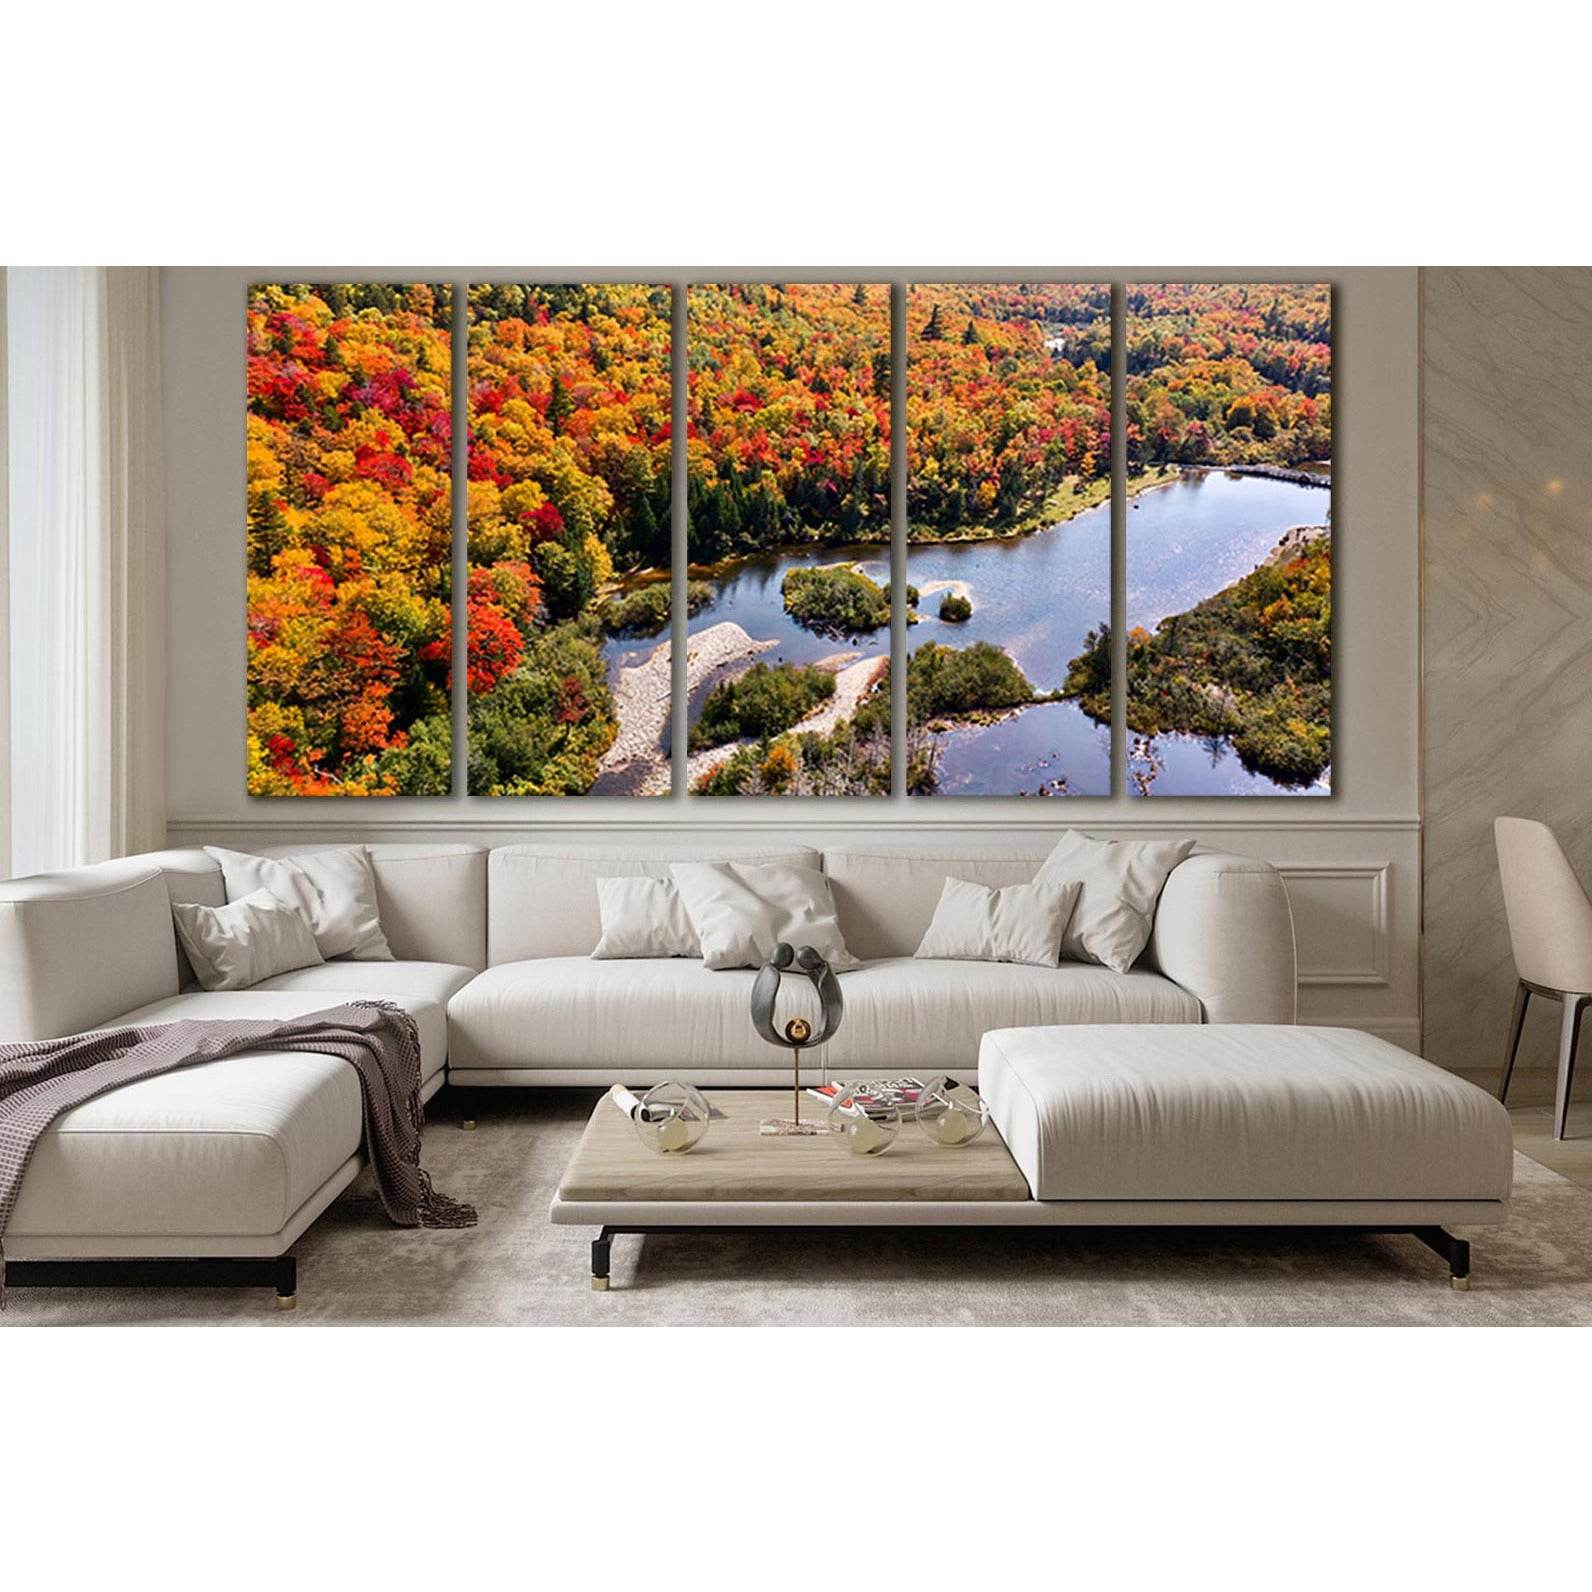 River In The Autumn Forest №SL1480 Ready to Hang Canvas Print